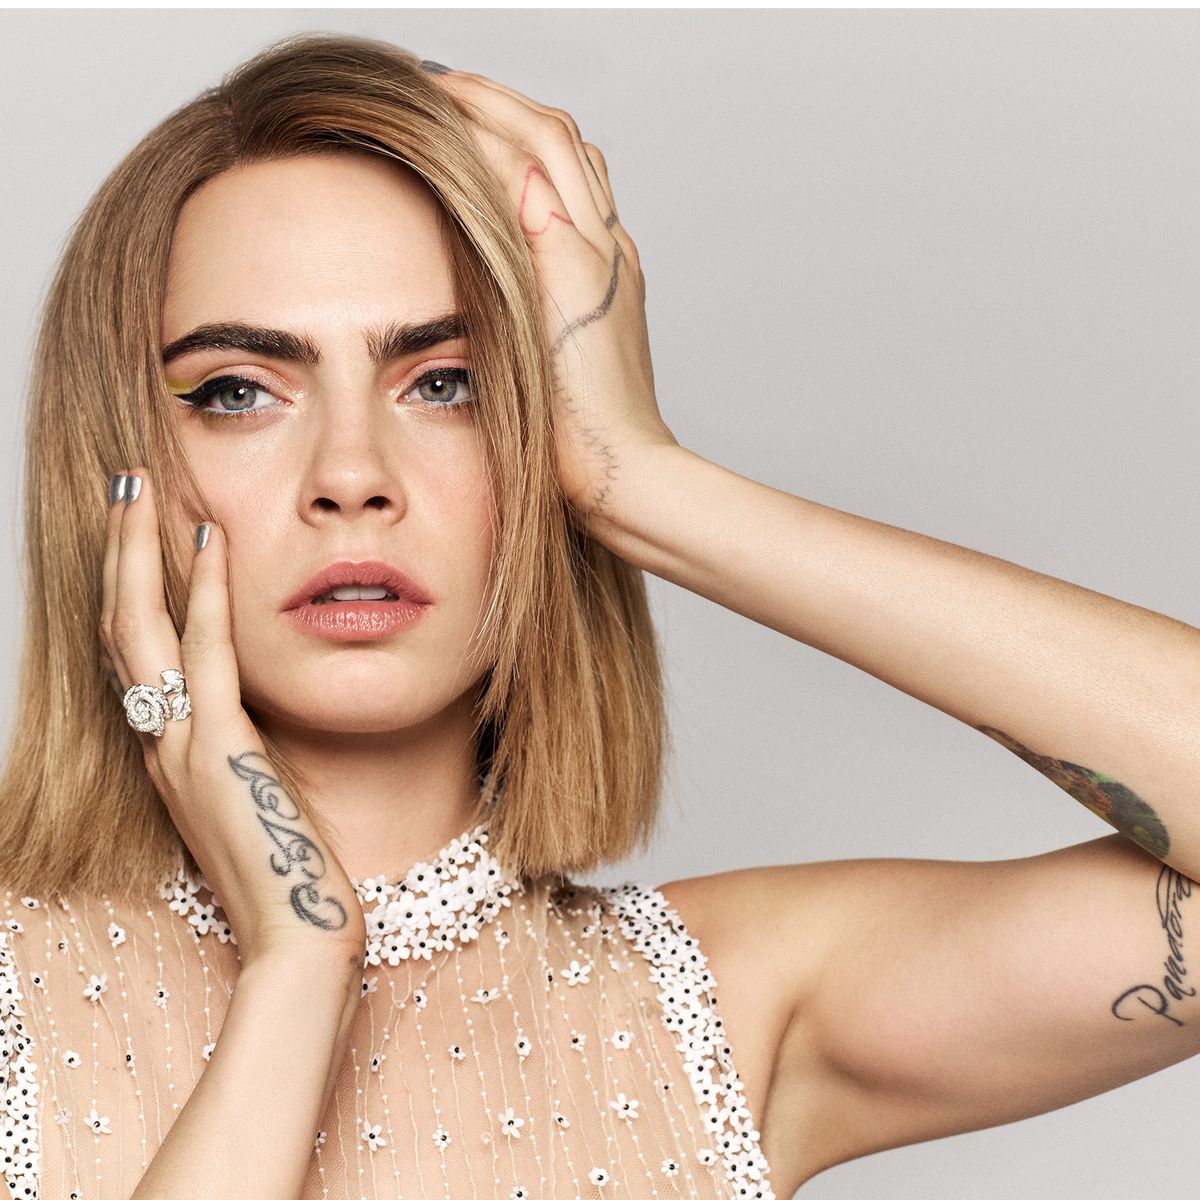 Cara Delevingne cover interview | Manifesting a baby and leading with  kindness